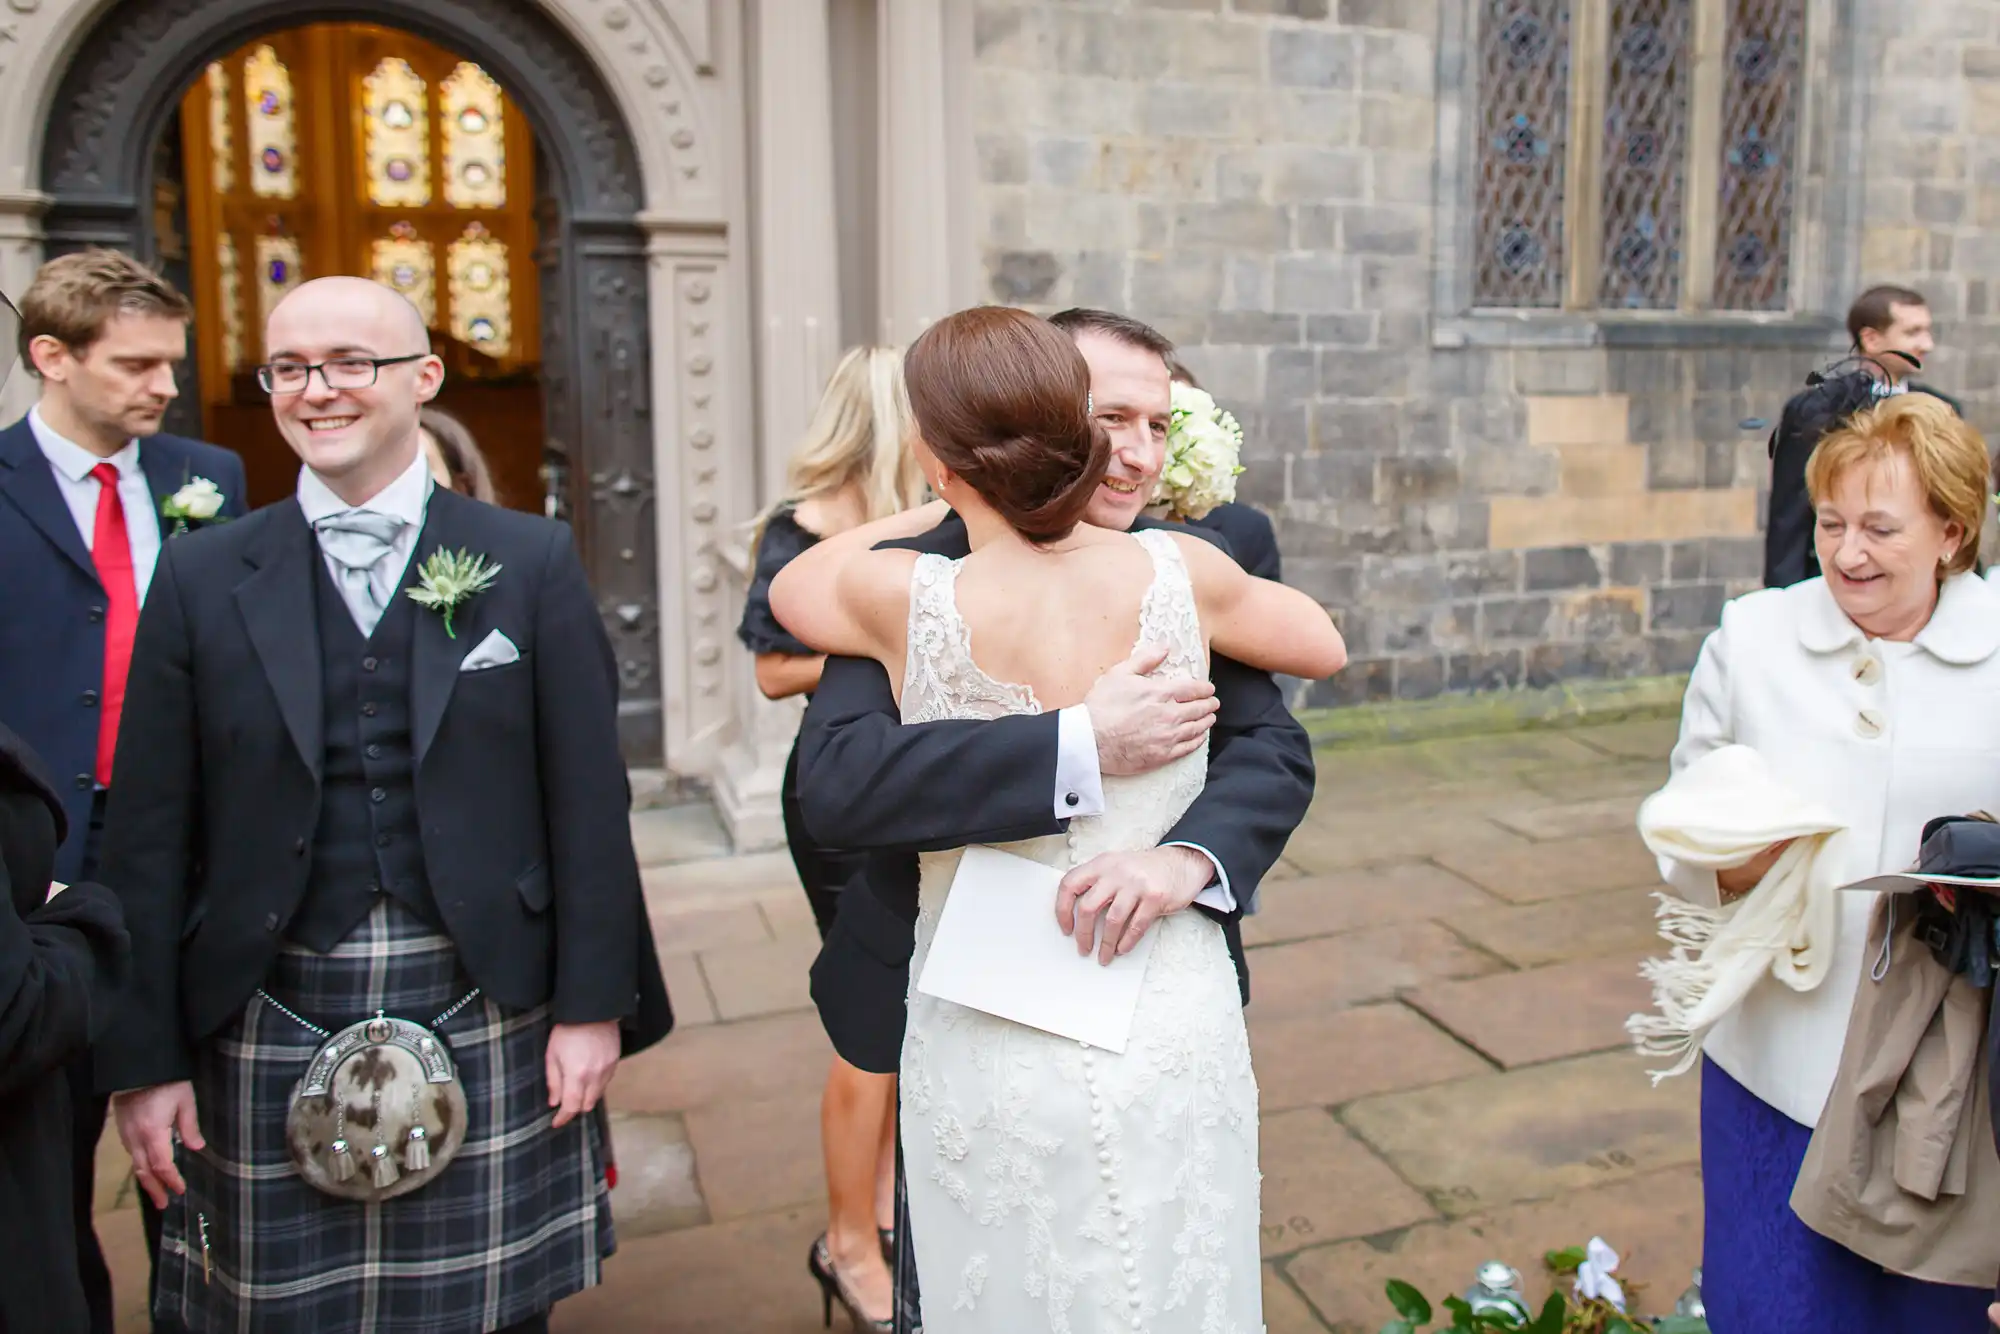 A bride in a white lace dress hugs a guest at a wedding ceremony outside a church, as a smiling man in a kilt looks on.